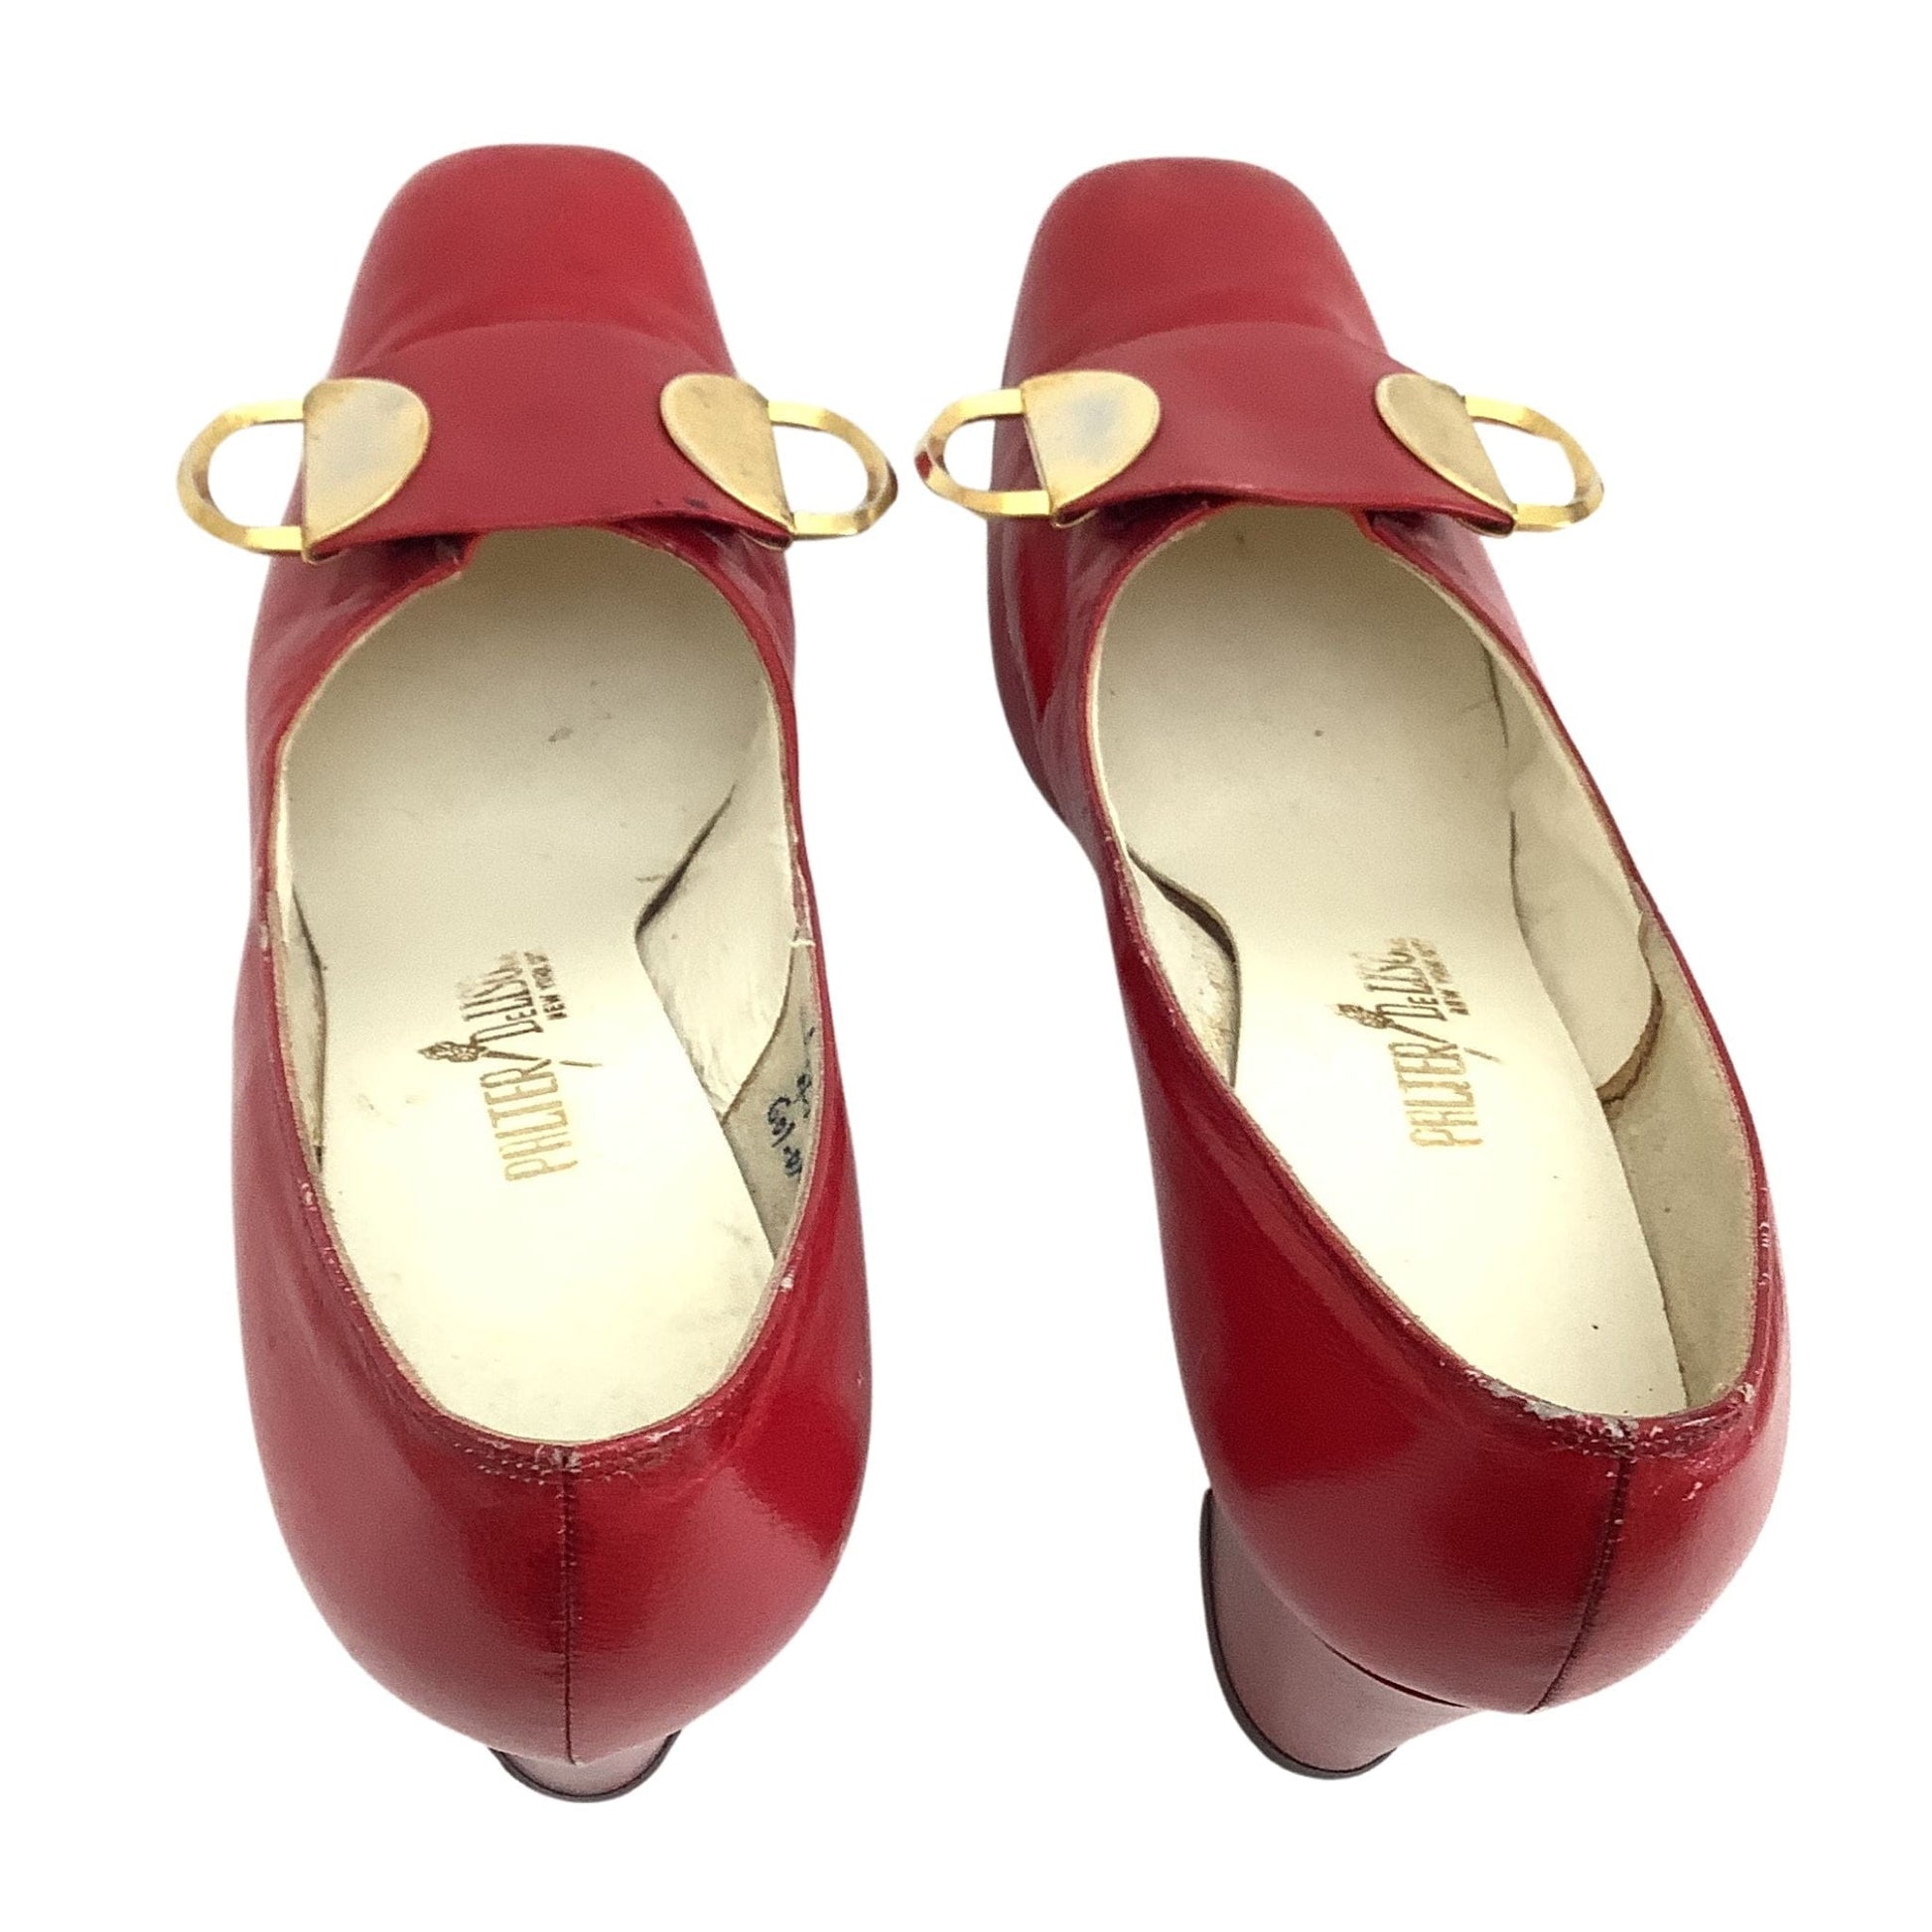 Palter Deliso Red Pumps 7 / Red / Classic